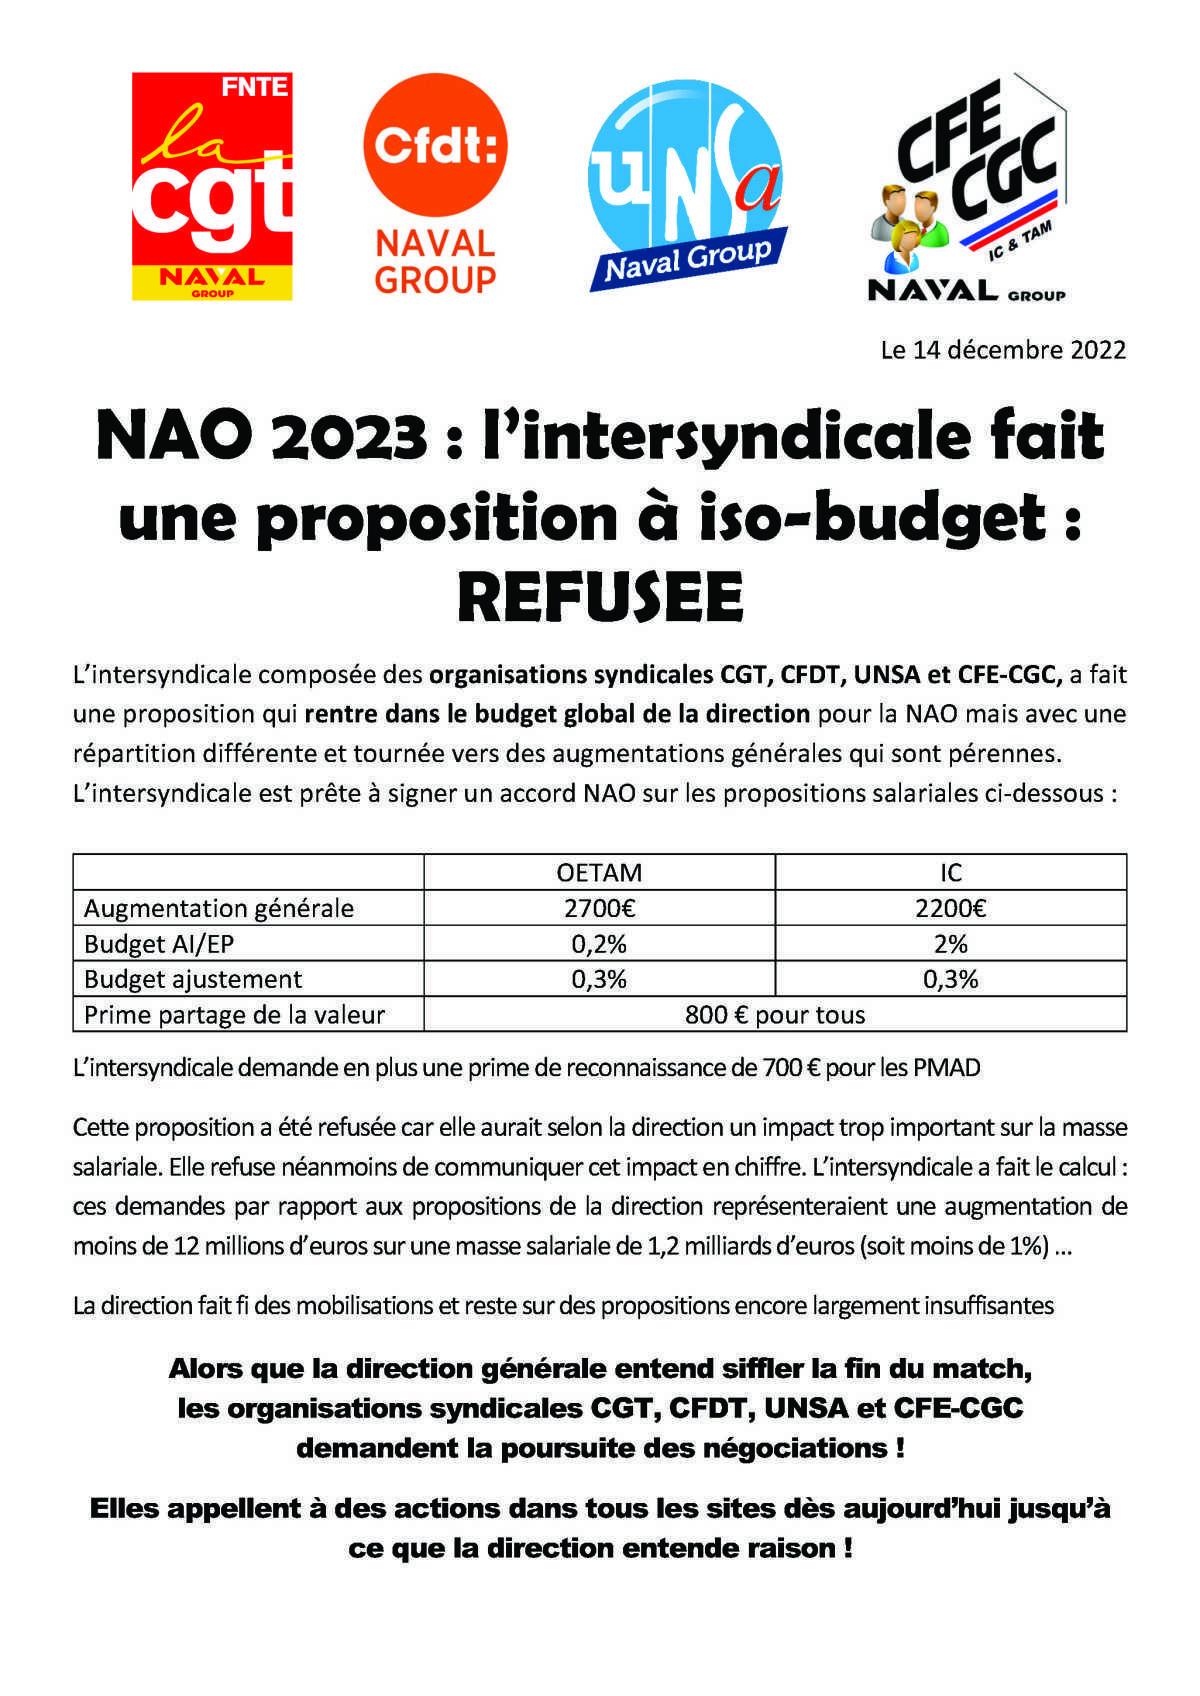 NAO 2023 : l’intersyndicale fait une proposition à iso-budget : REFUSEE